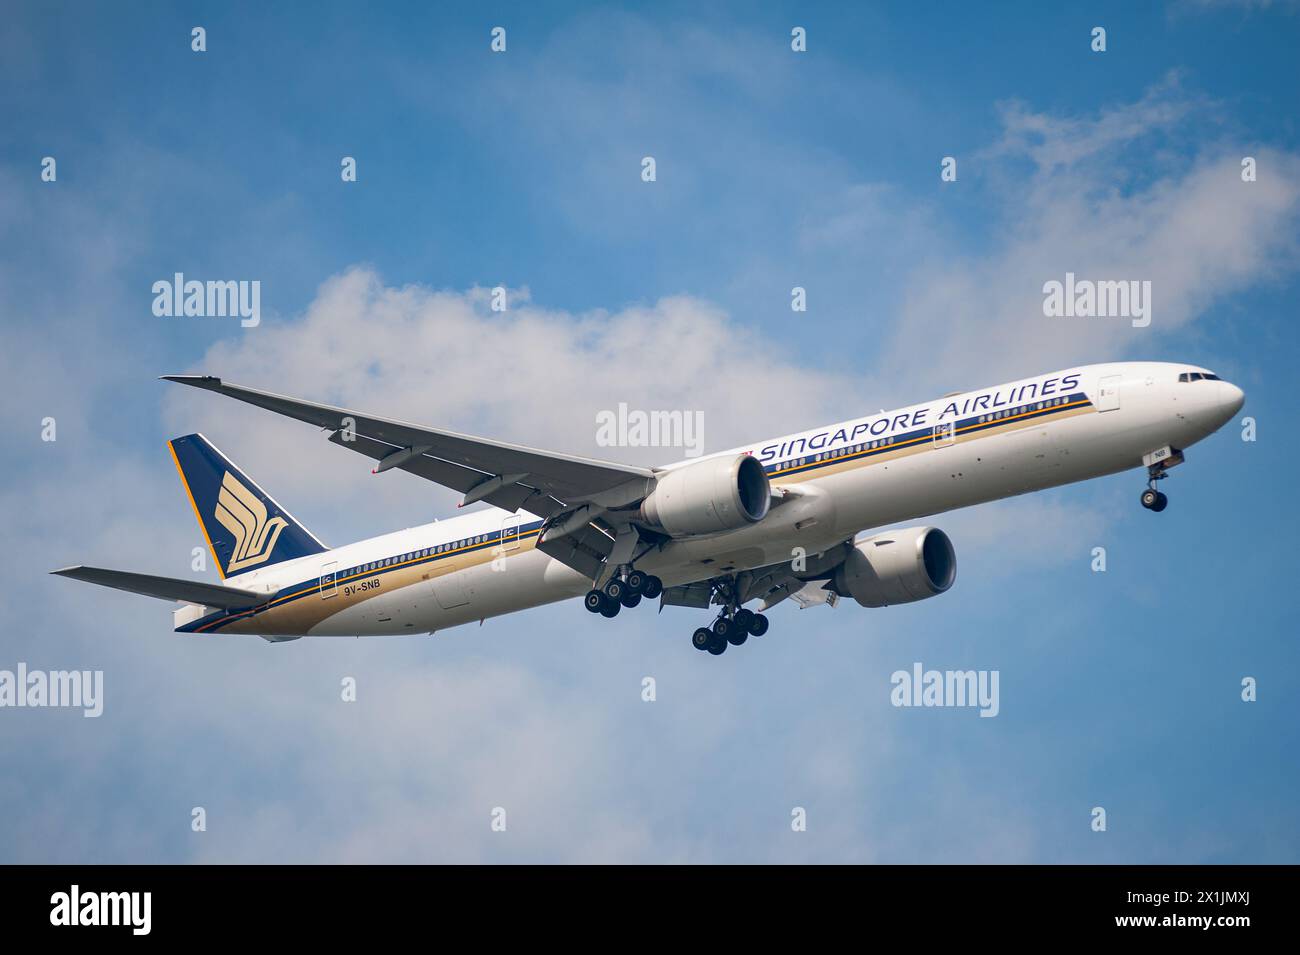 26.07.2023, Singapore, Republic of Singapore, Asia - A Singapore Airlines (SIA) Boeing 777-300 ER passenger aircraft with the registration 9V-SNB appr Stock Photo